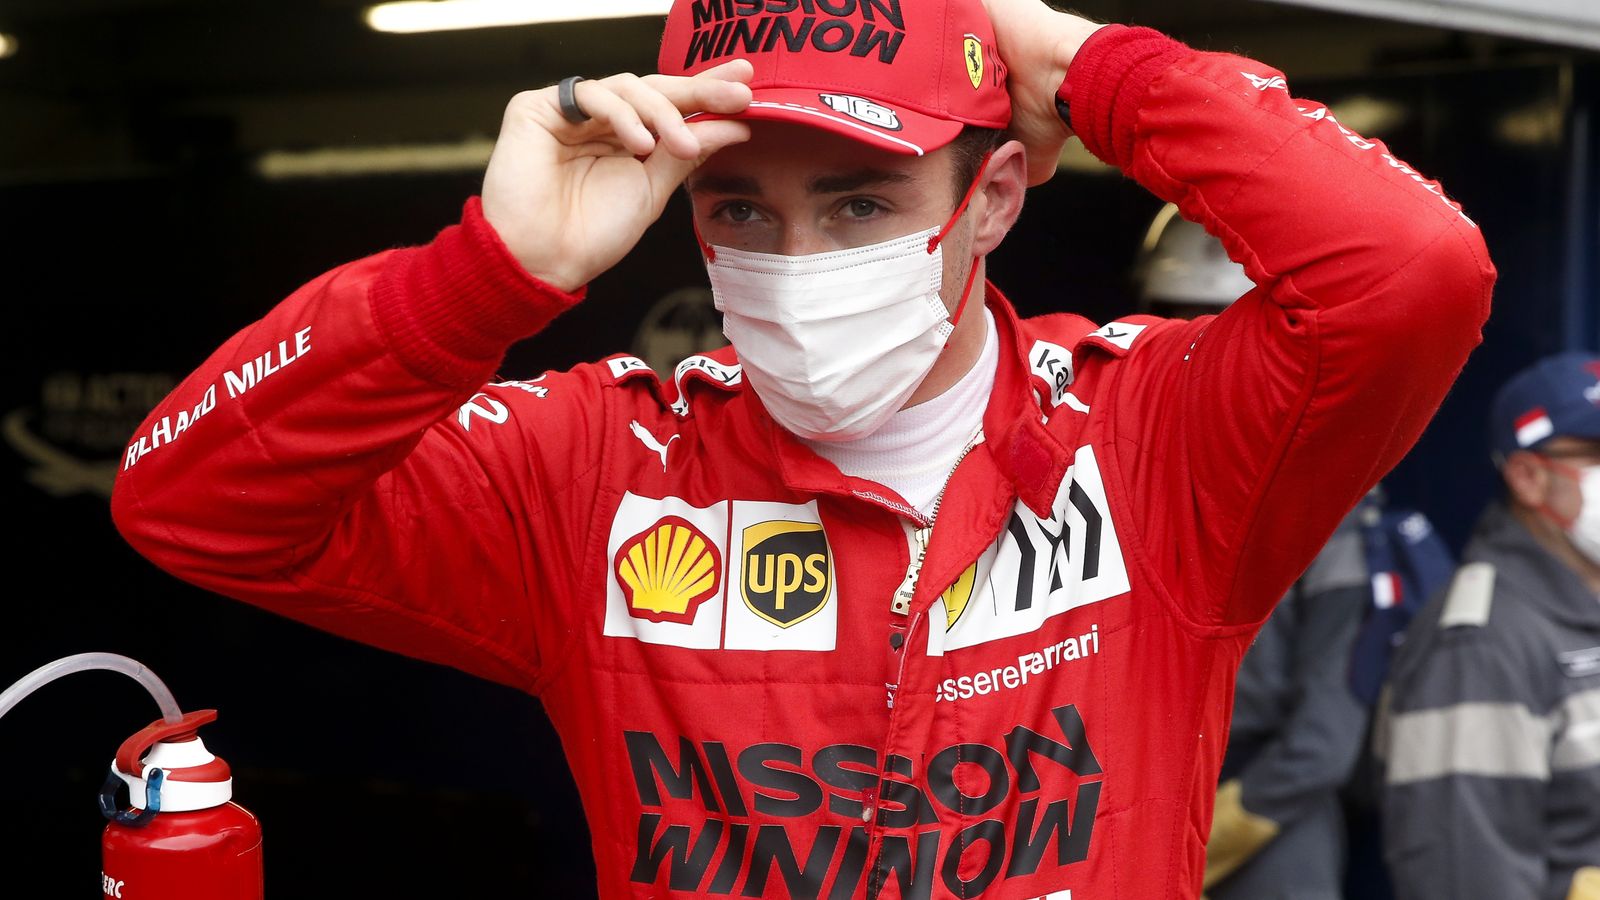 Monaco Gp Charles Leclerc Gearbox Not Seriously Damaged With More Ferrari Checks Ahead Of Race Insider Voice